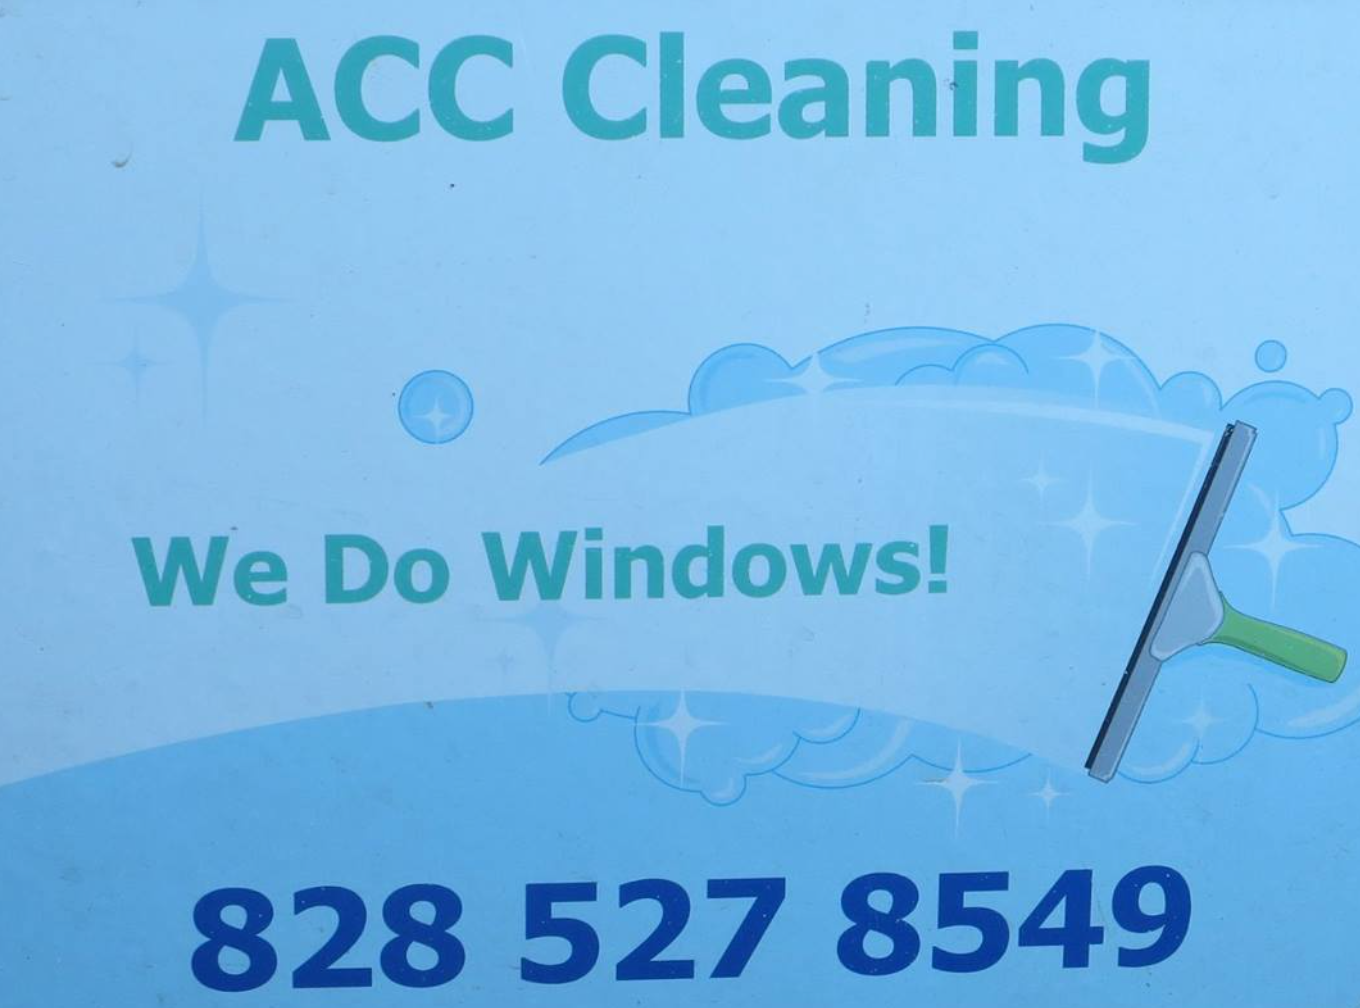 ACC Cleaning 